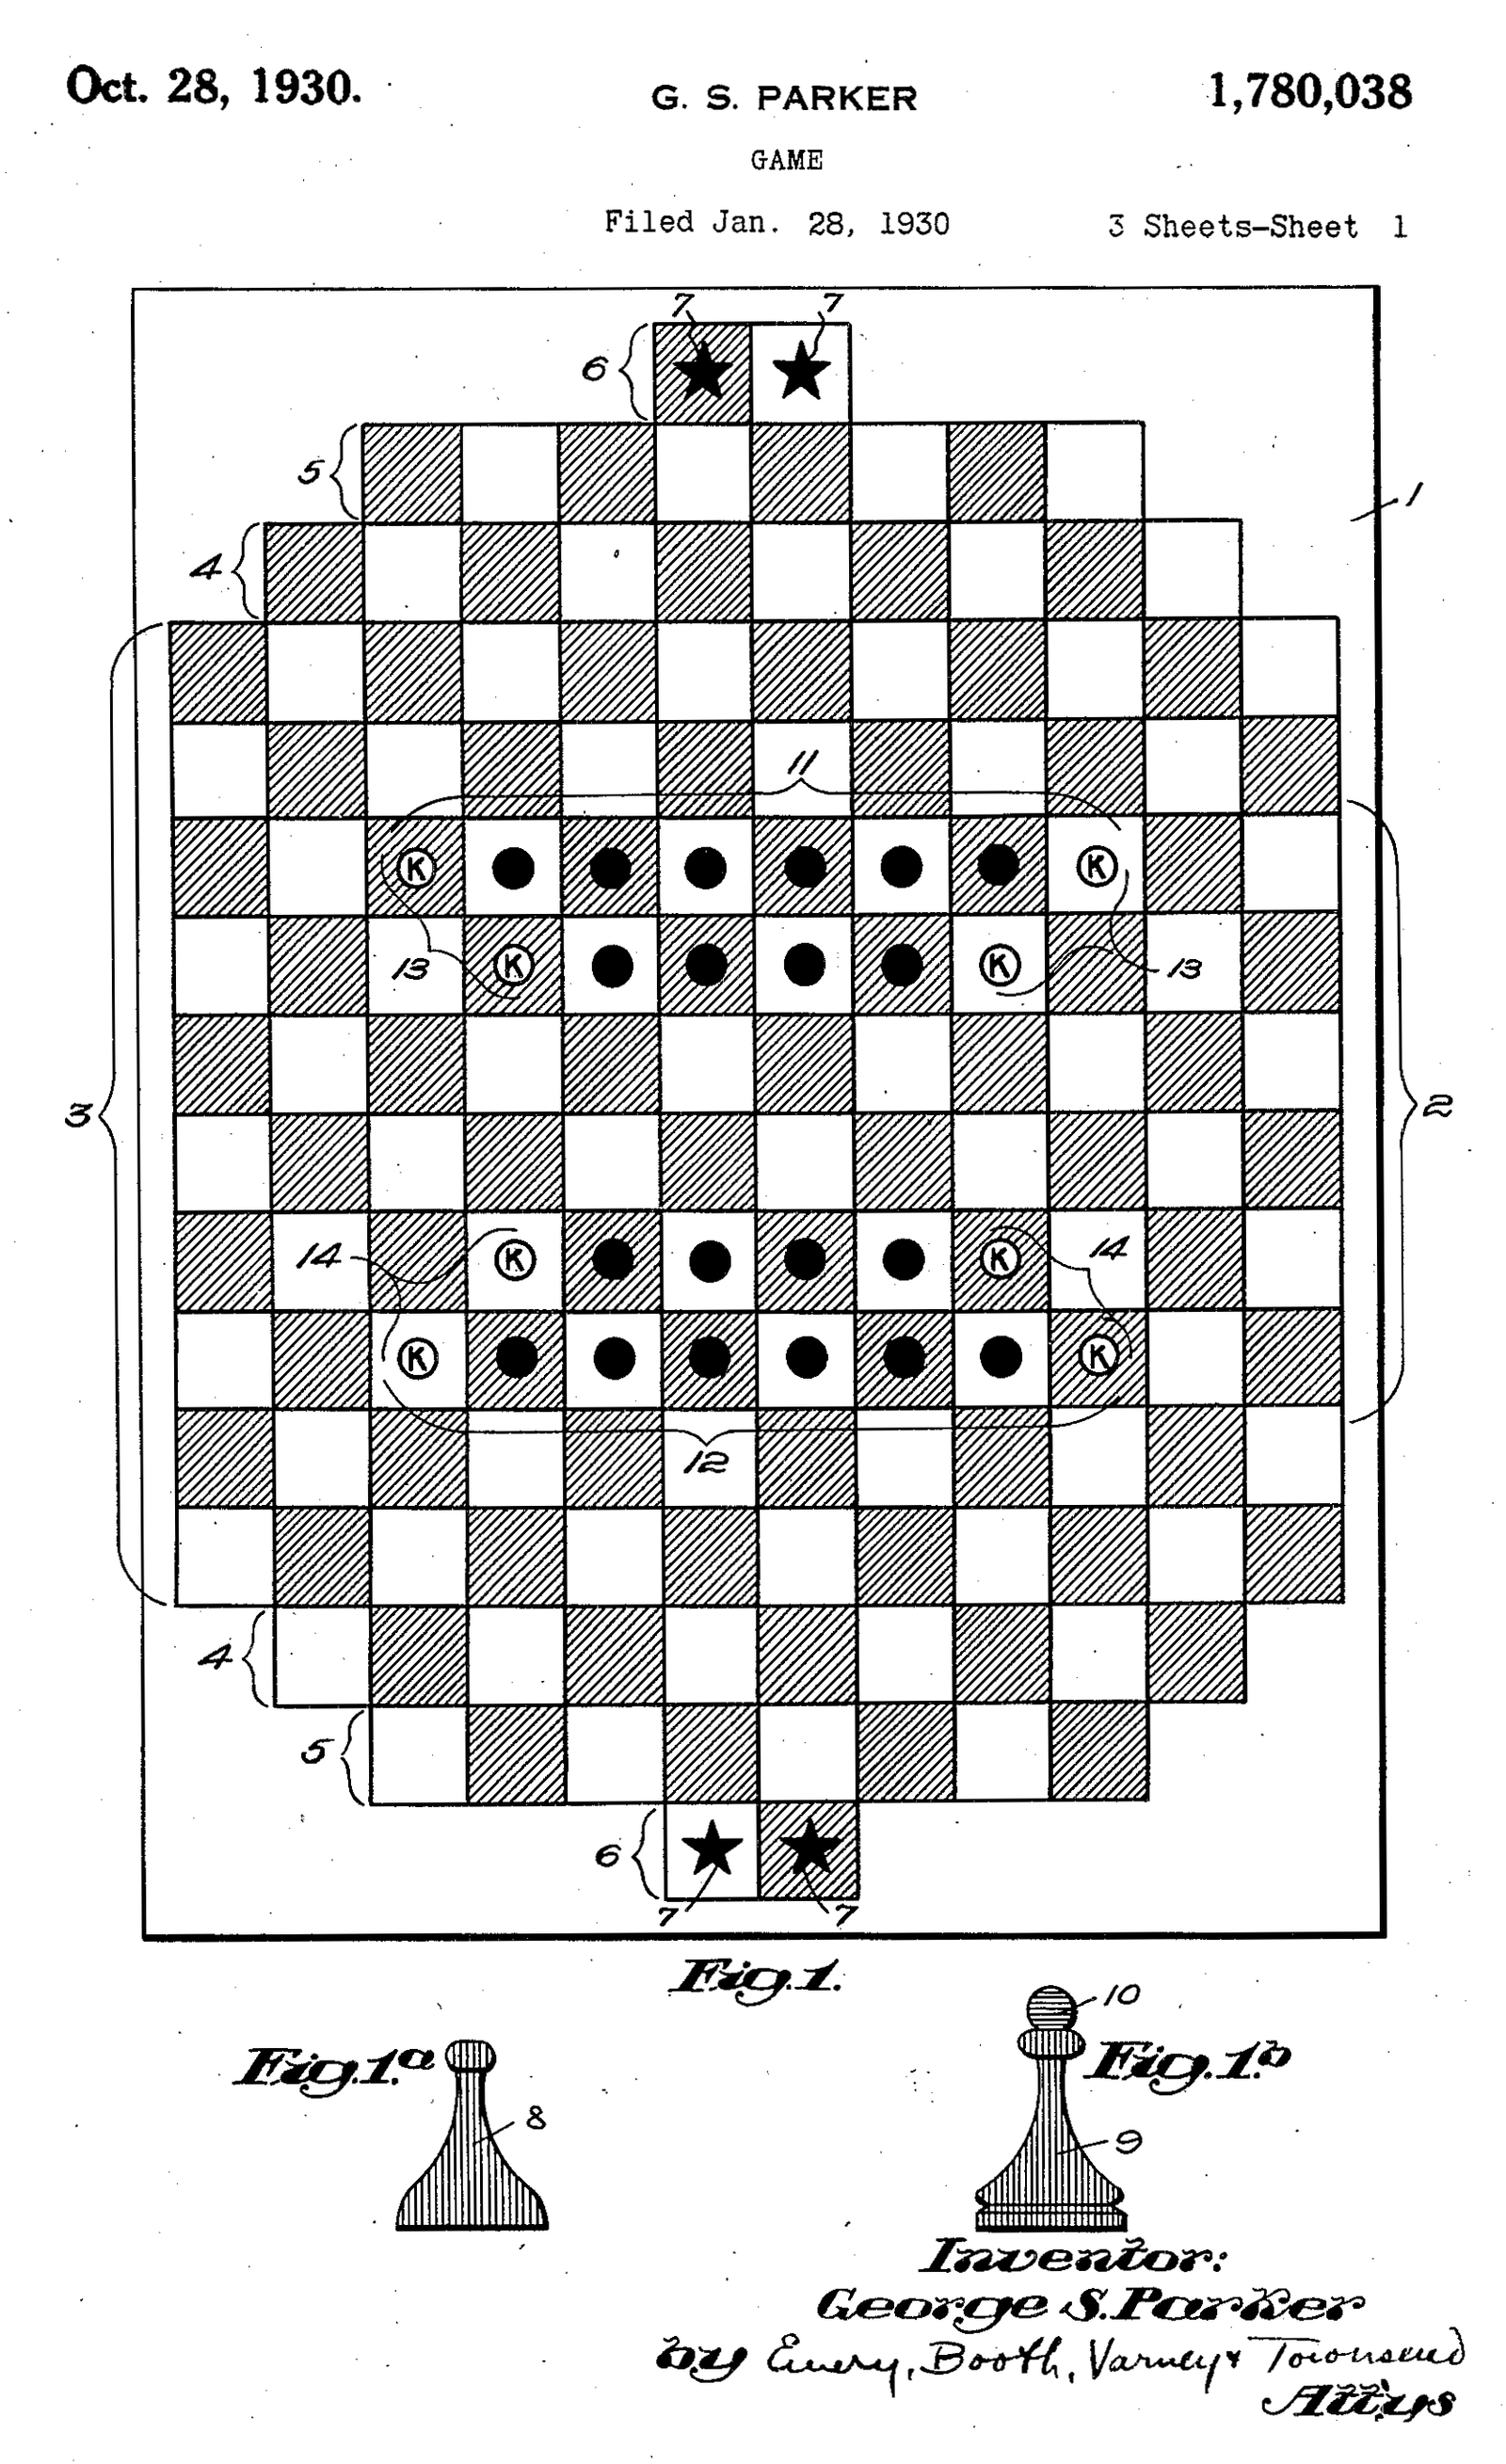 A black and white drawing of a game board